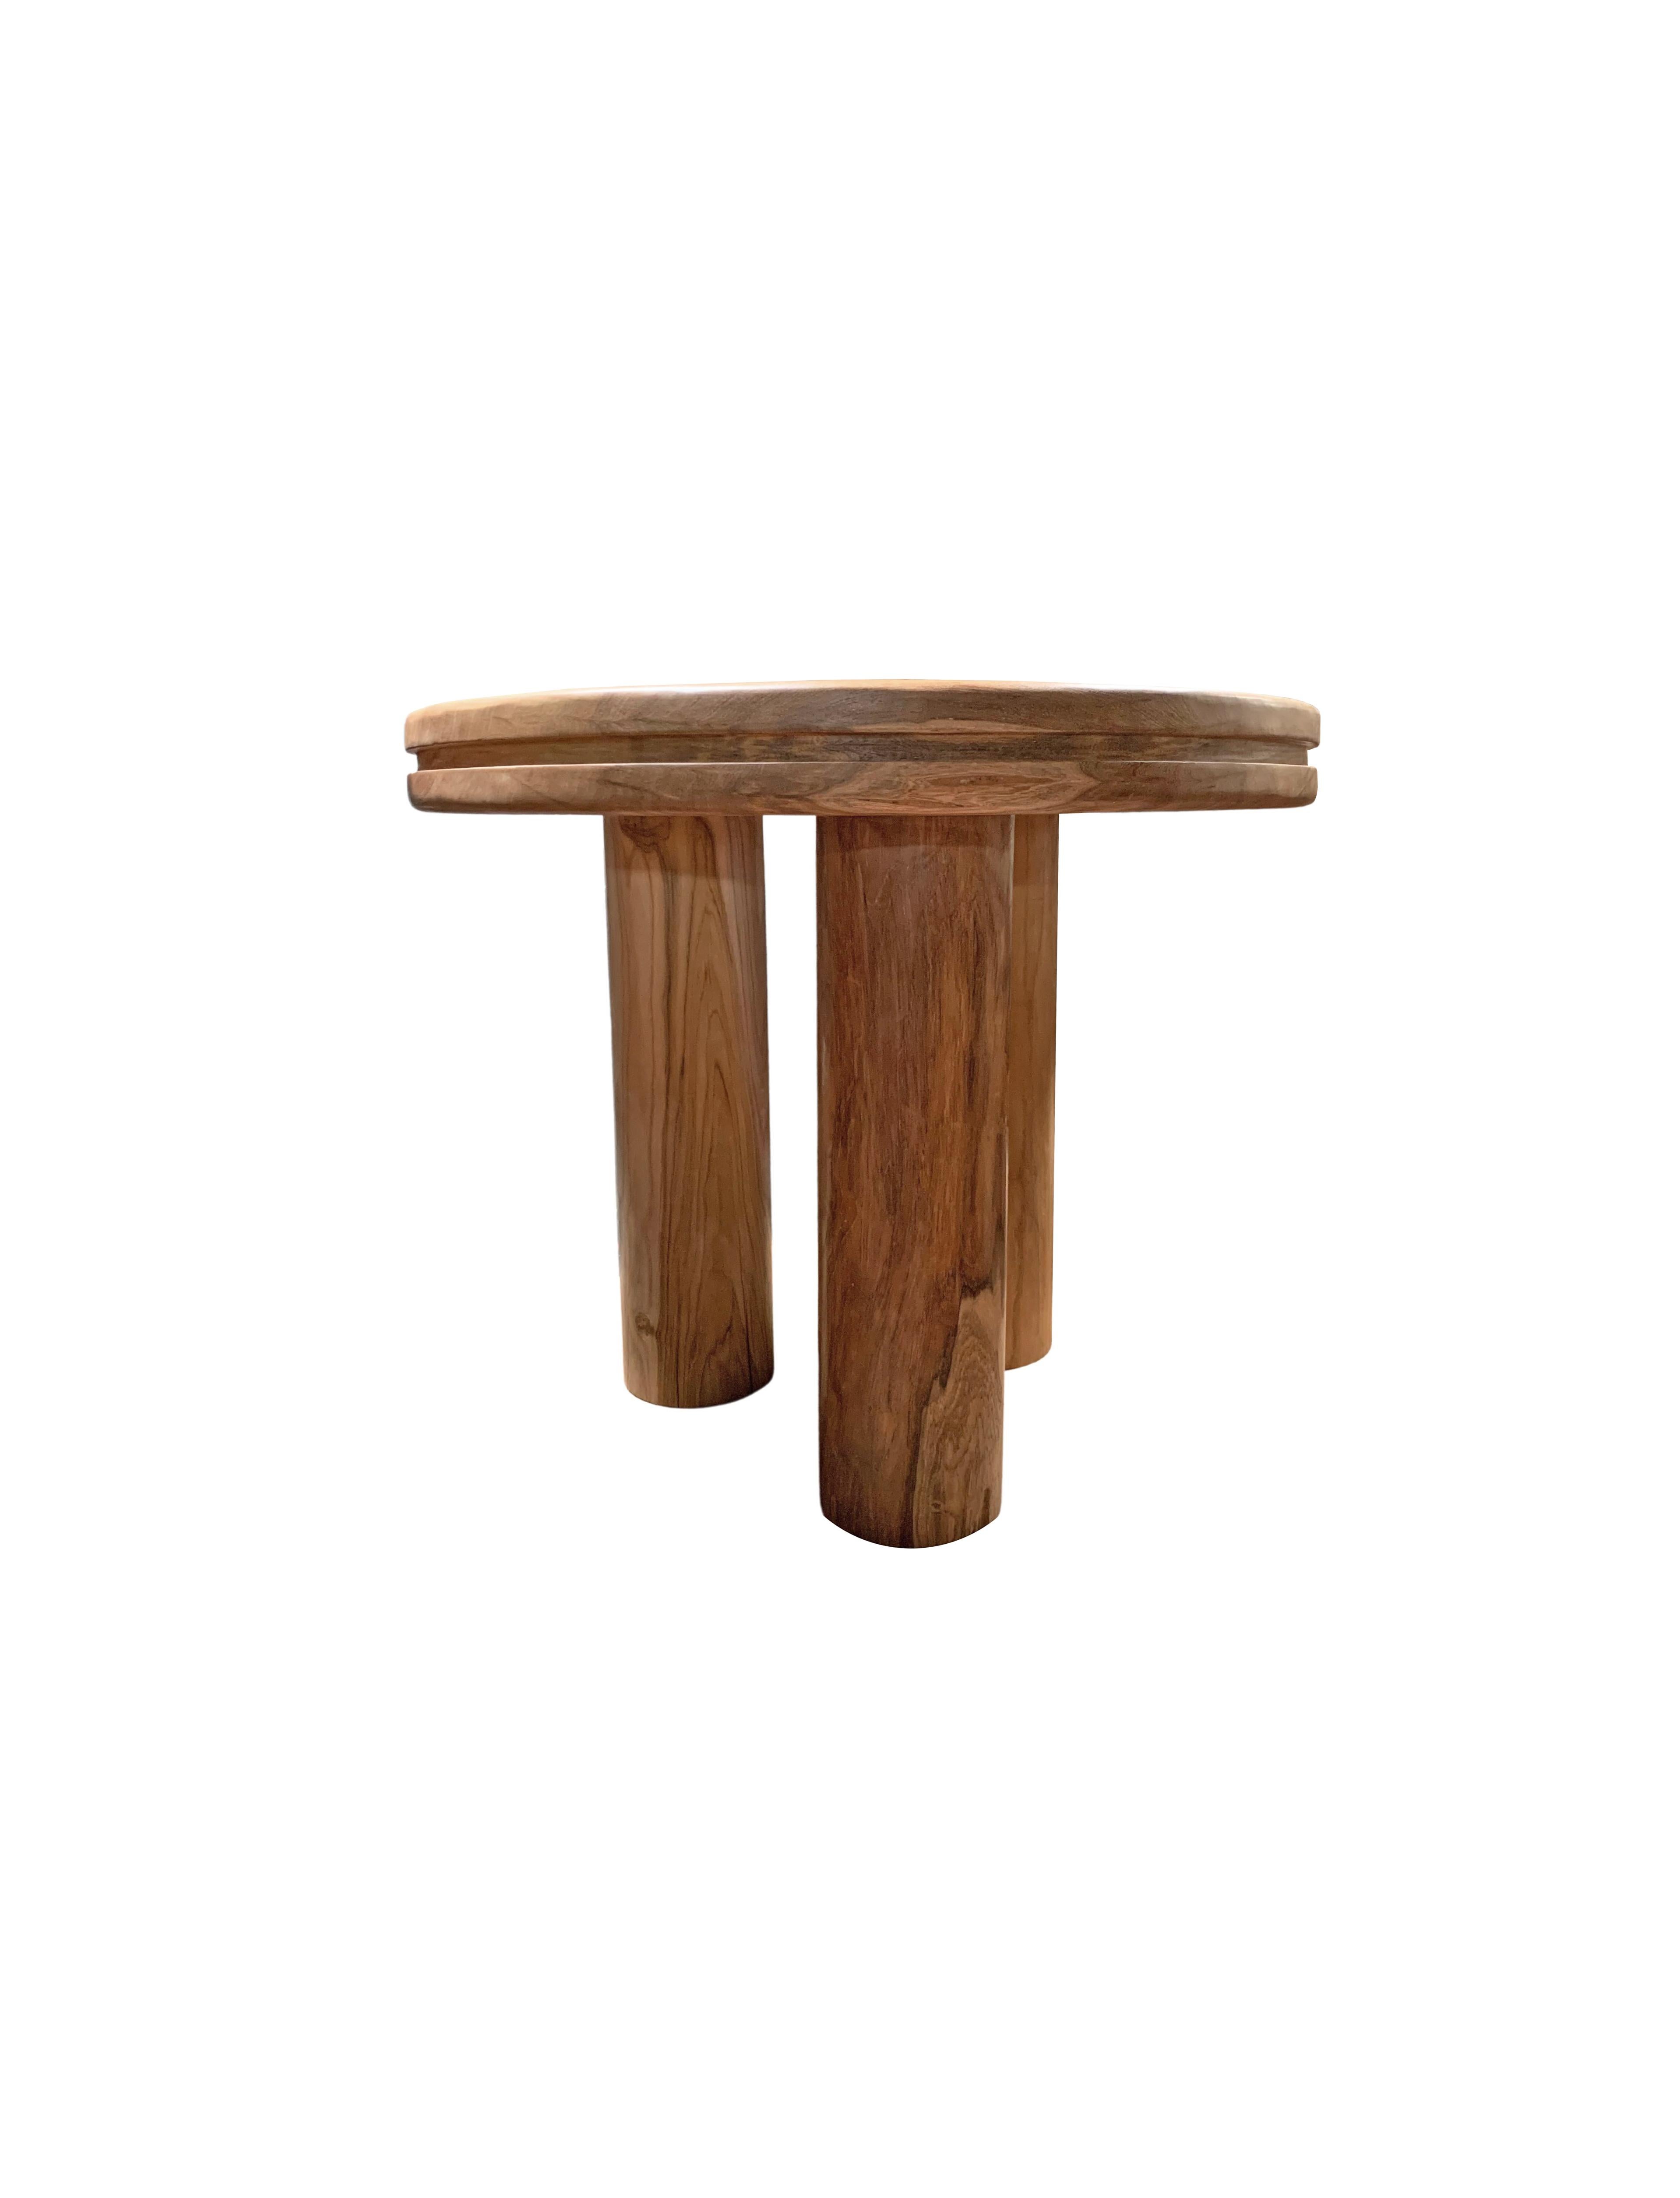 Indonesian Sculptural Solid Teak Wood Round Table  For Sale